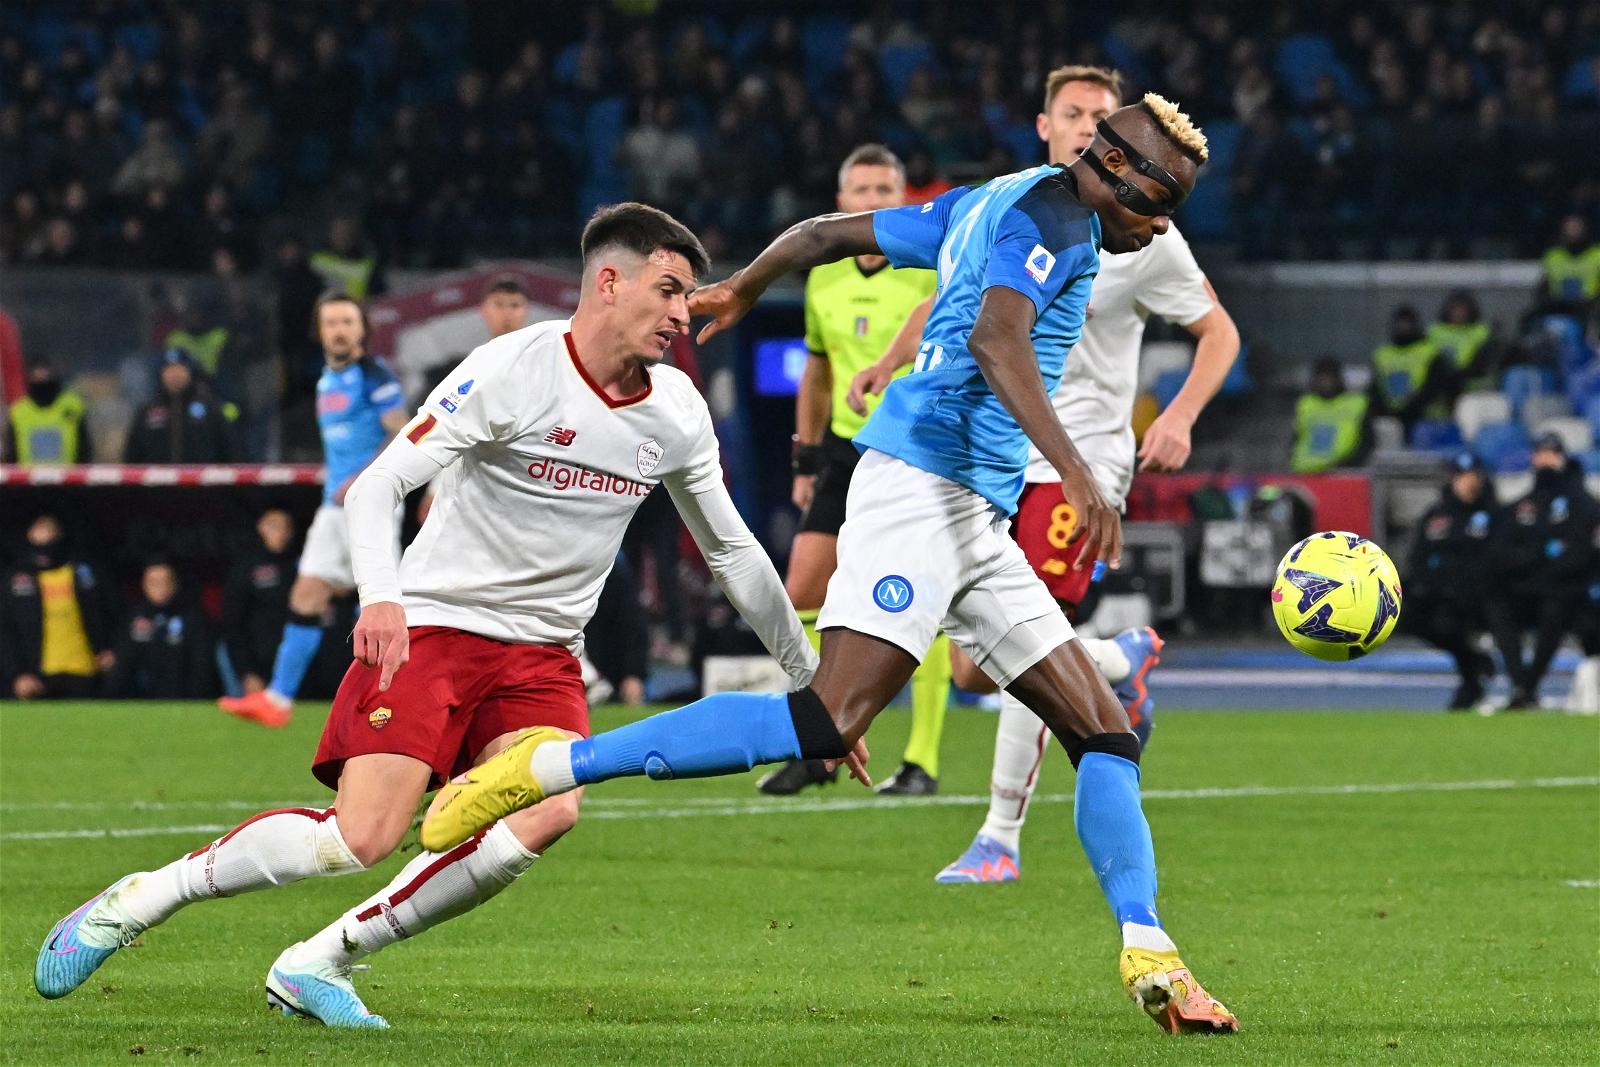 Osimhen nets 2 as Napoli comes back at Frosinone to get title defense off  to winning start